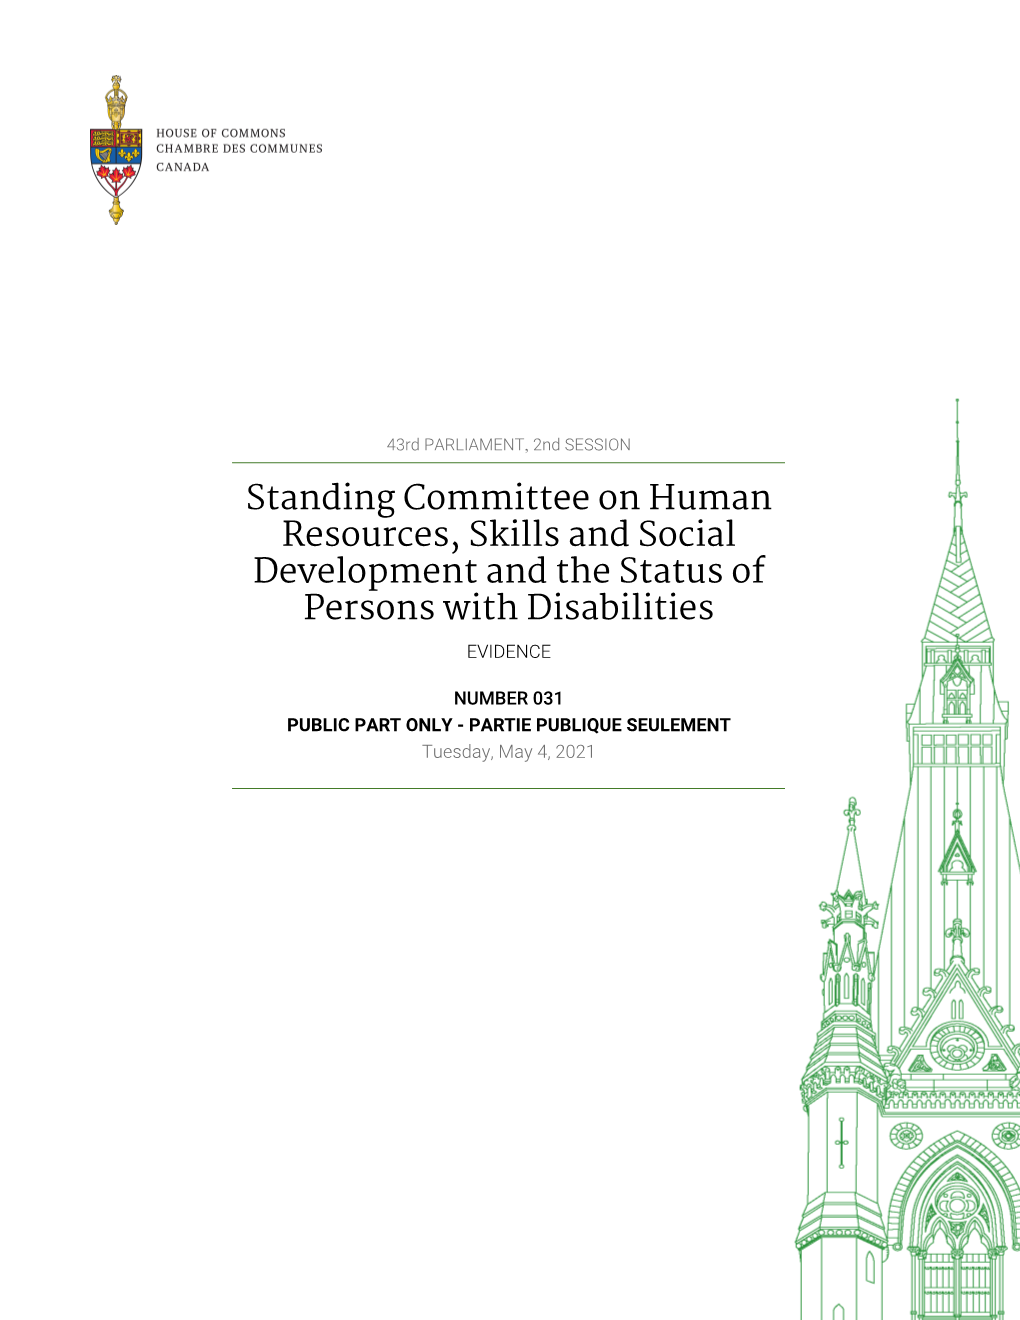 Evidence of the Standing Committee on Human Resources, Skills And